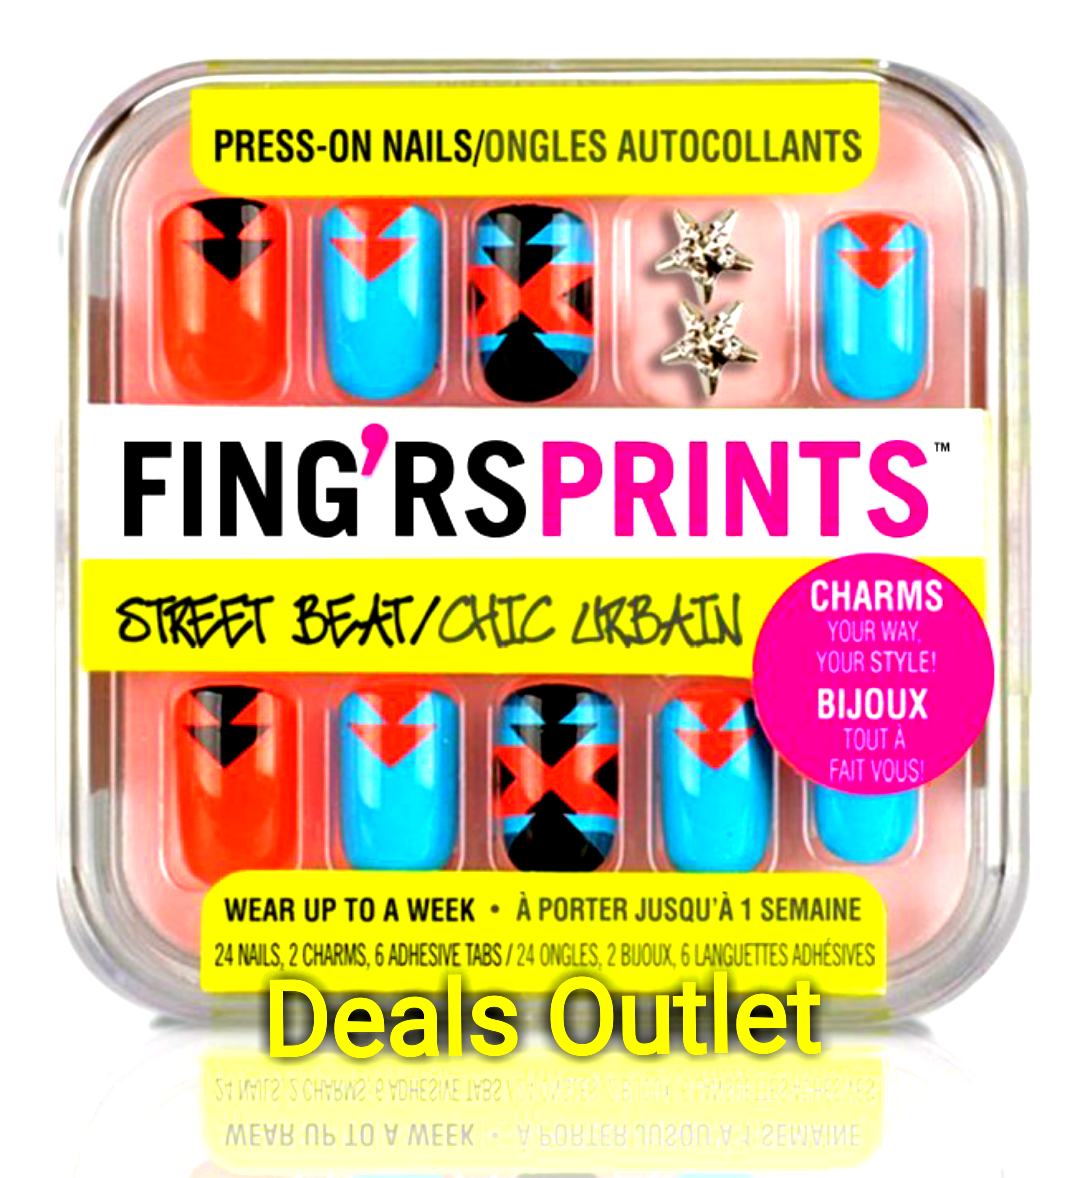 Fing'rsprints Press-on Nails Wrap Star #31041